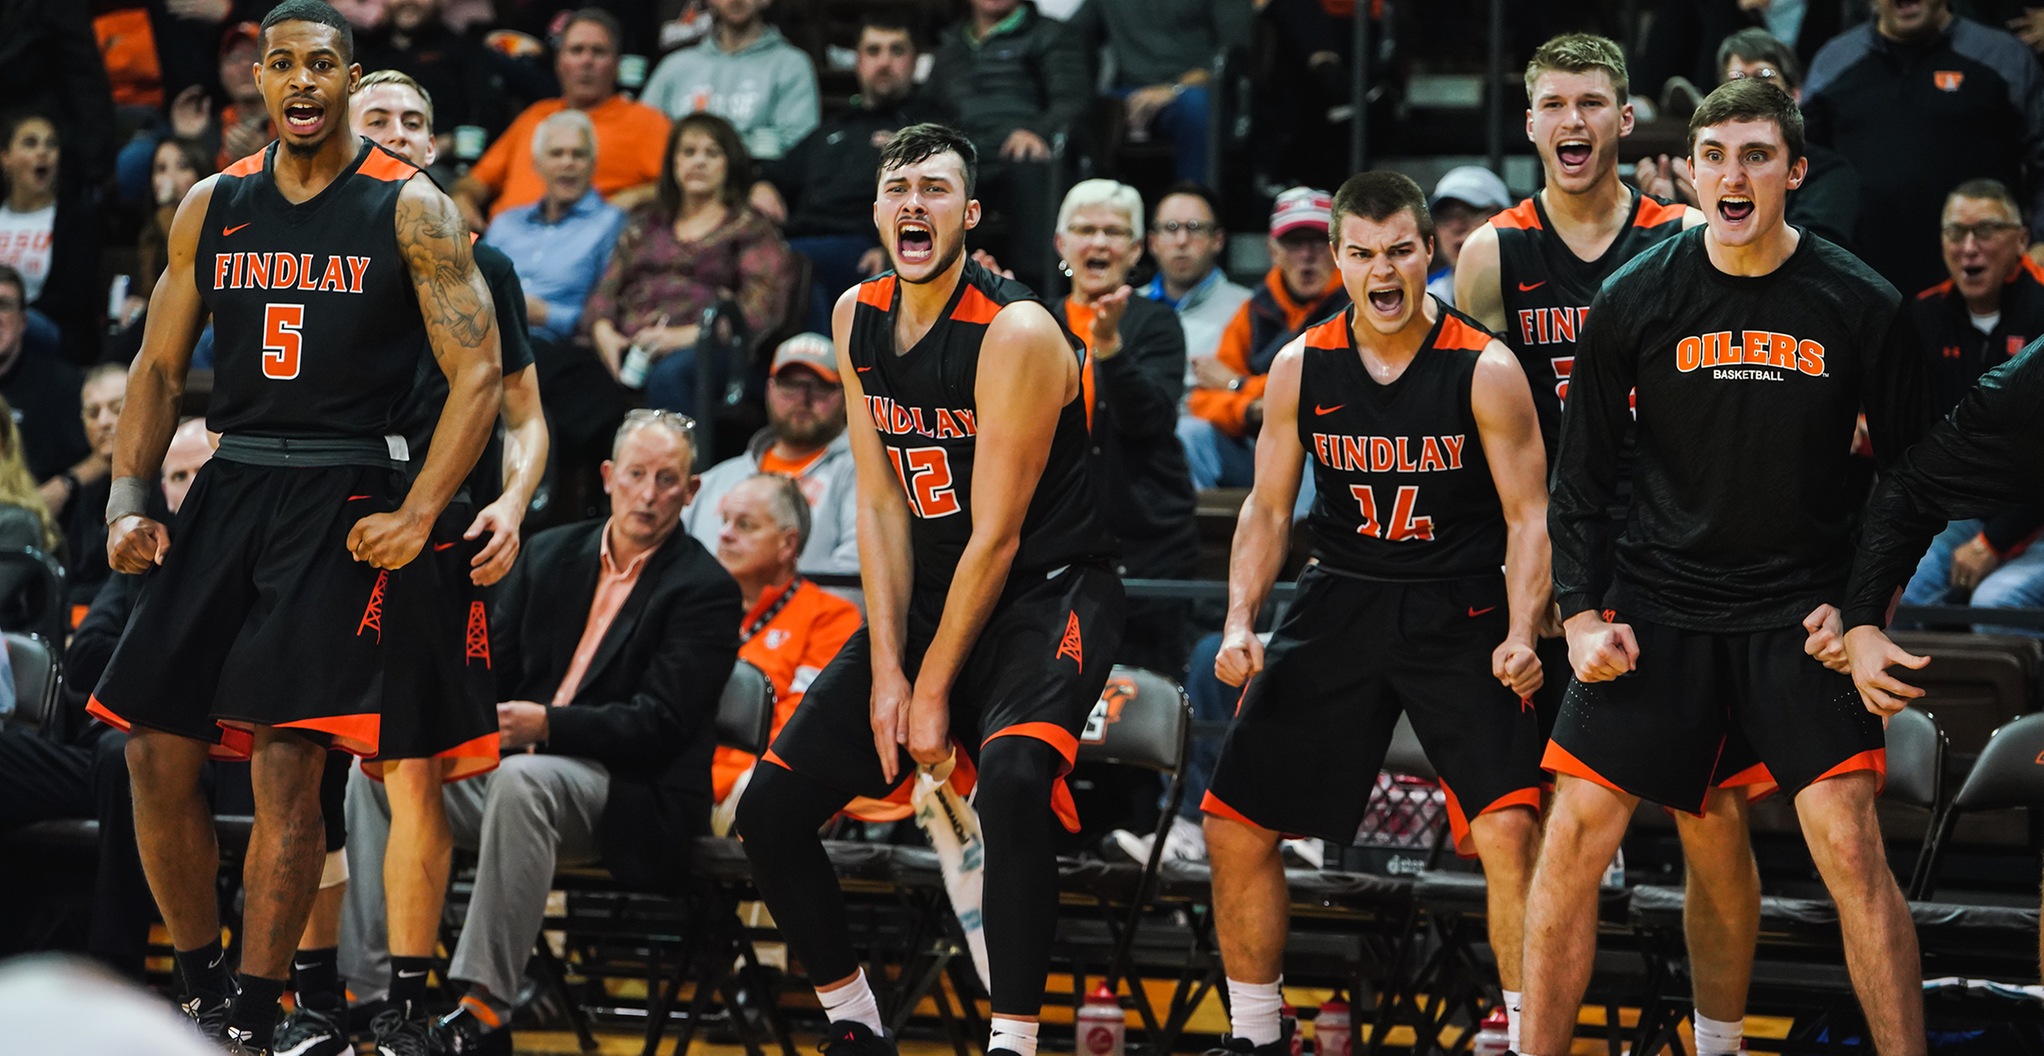 Oilers Knock Off #18 Spartans